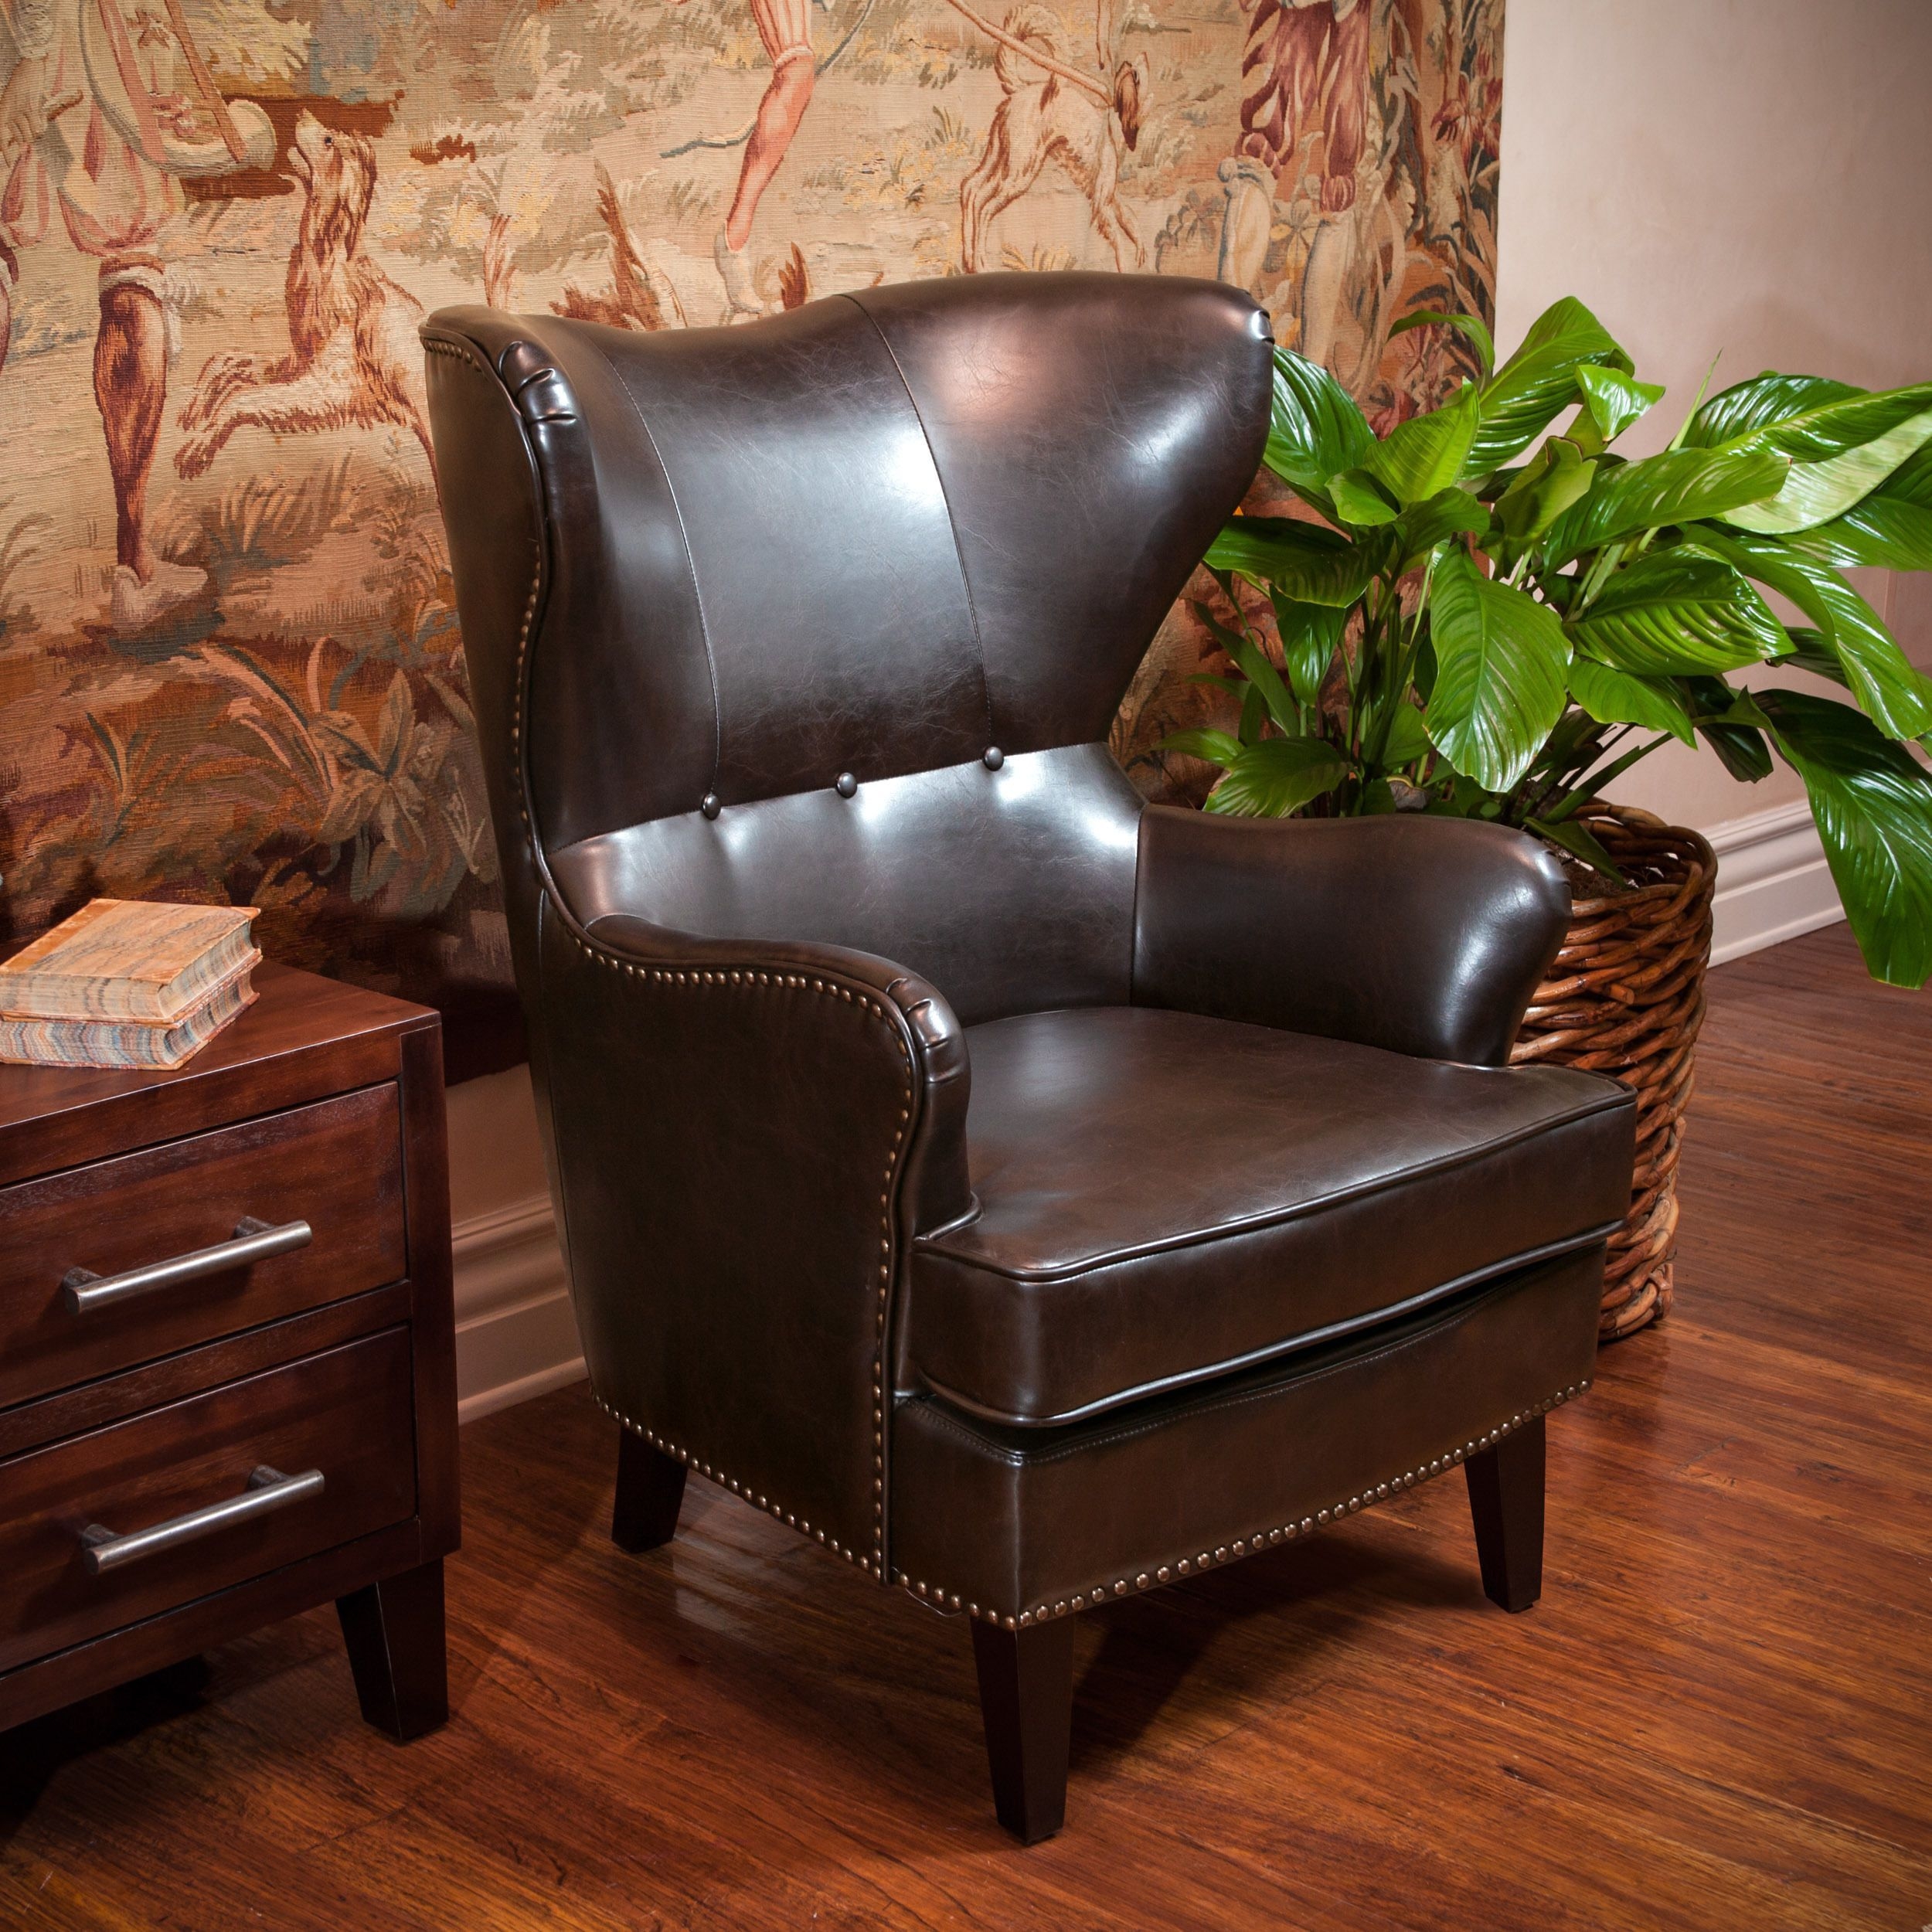 Romford Brown Leather Wingback Club Chair w/ Nailhead Accents Trim